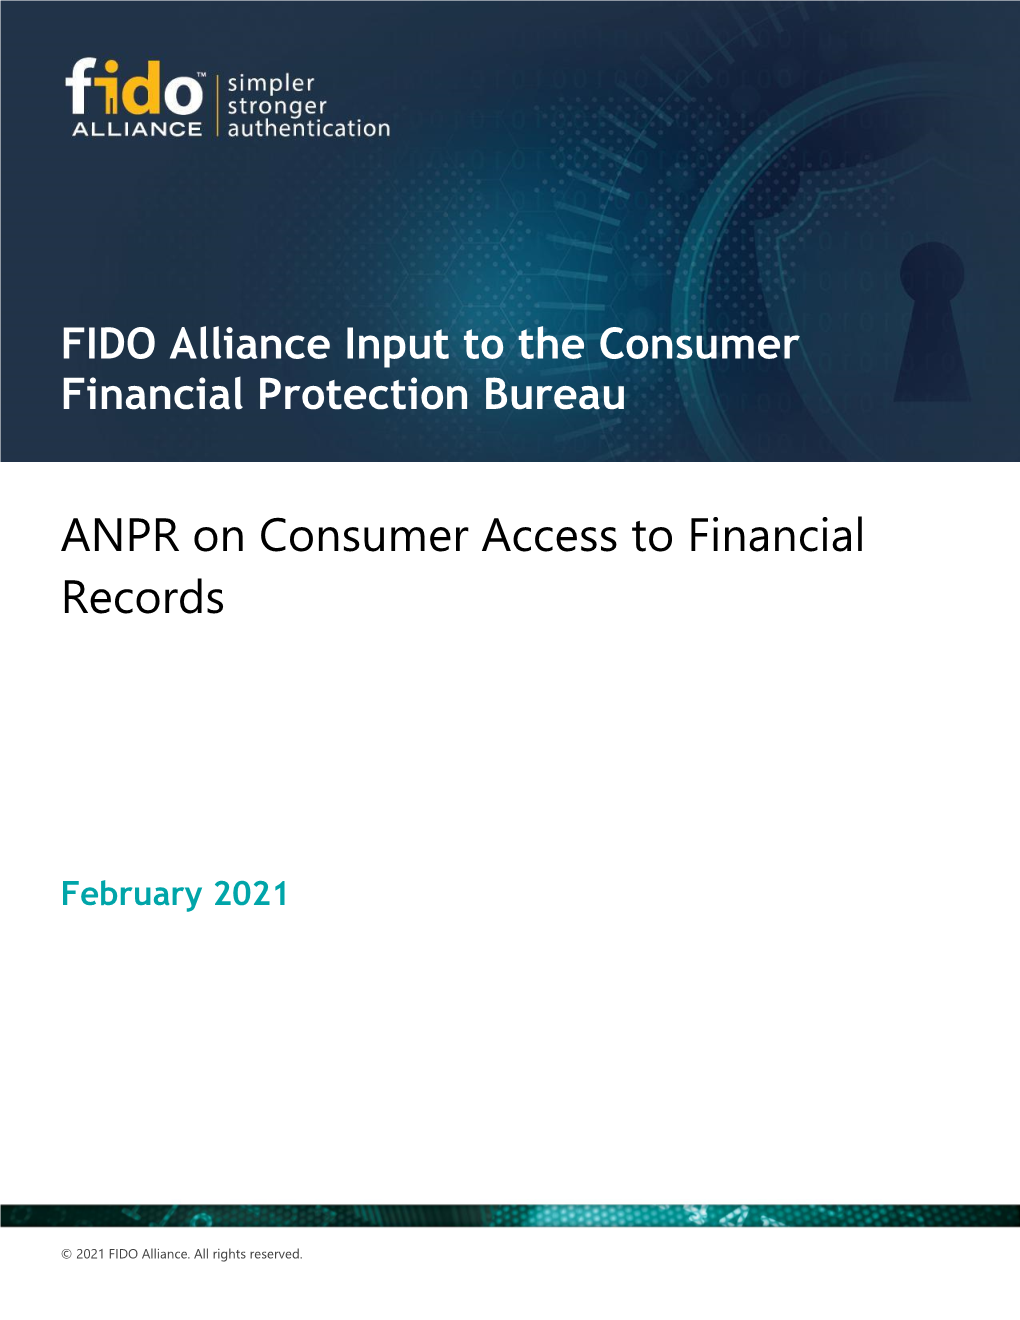 ANPR on Consumer Access to Financial Records